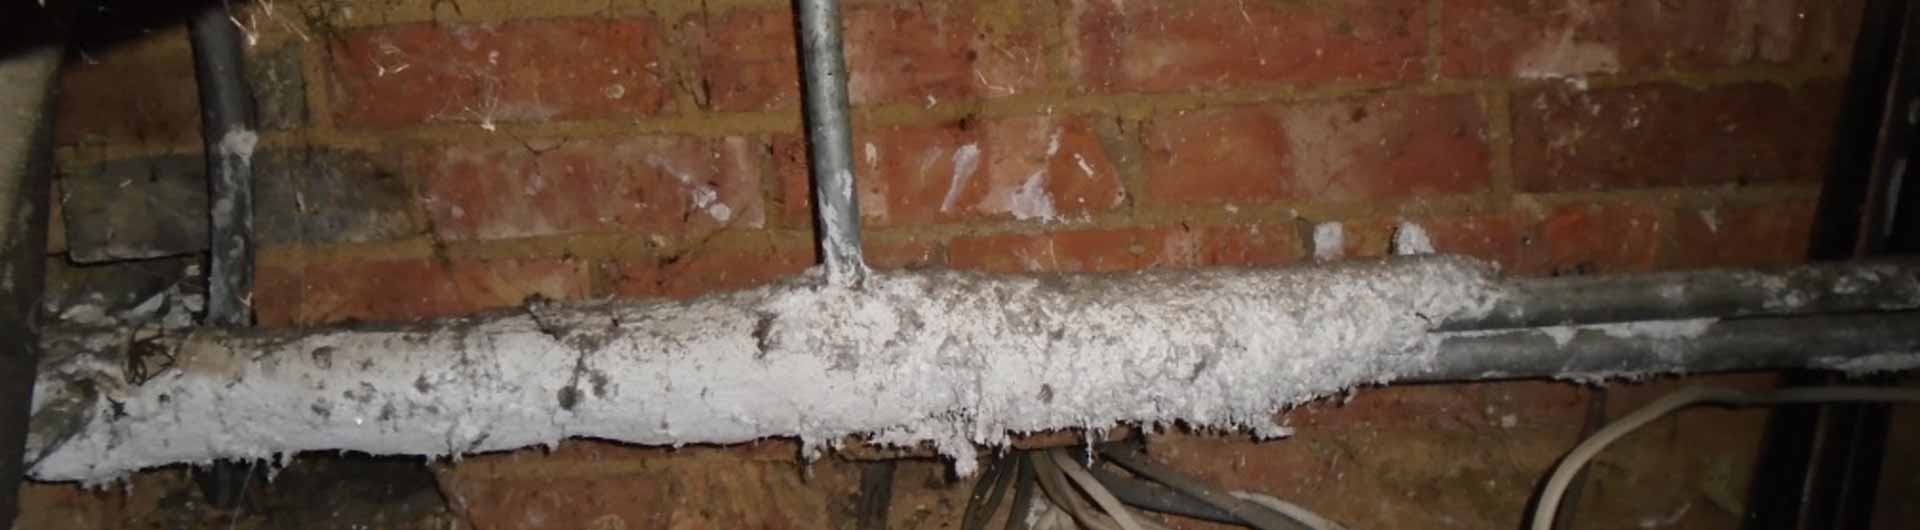 Asbestos covered pipe